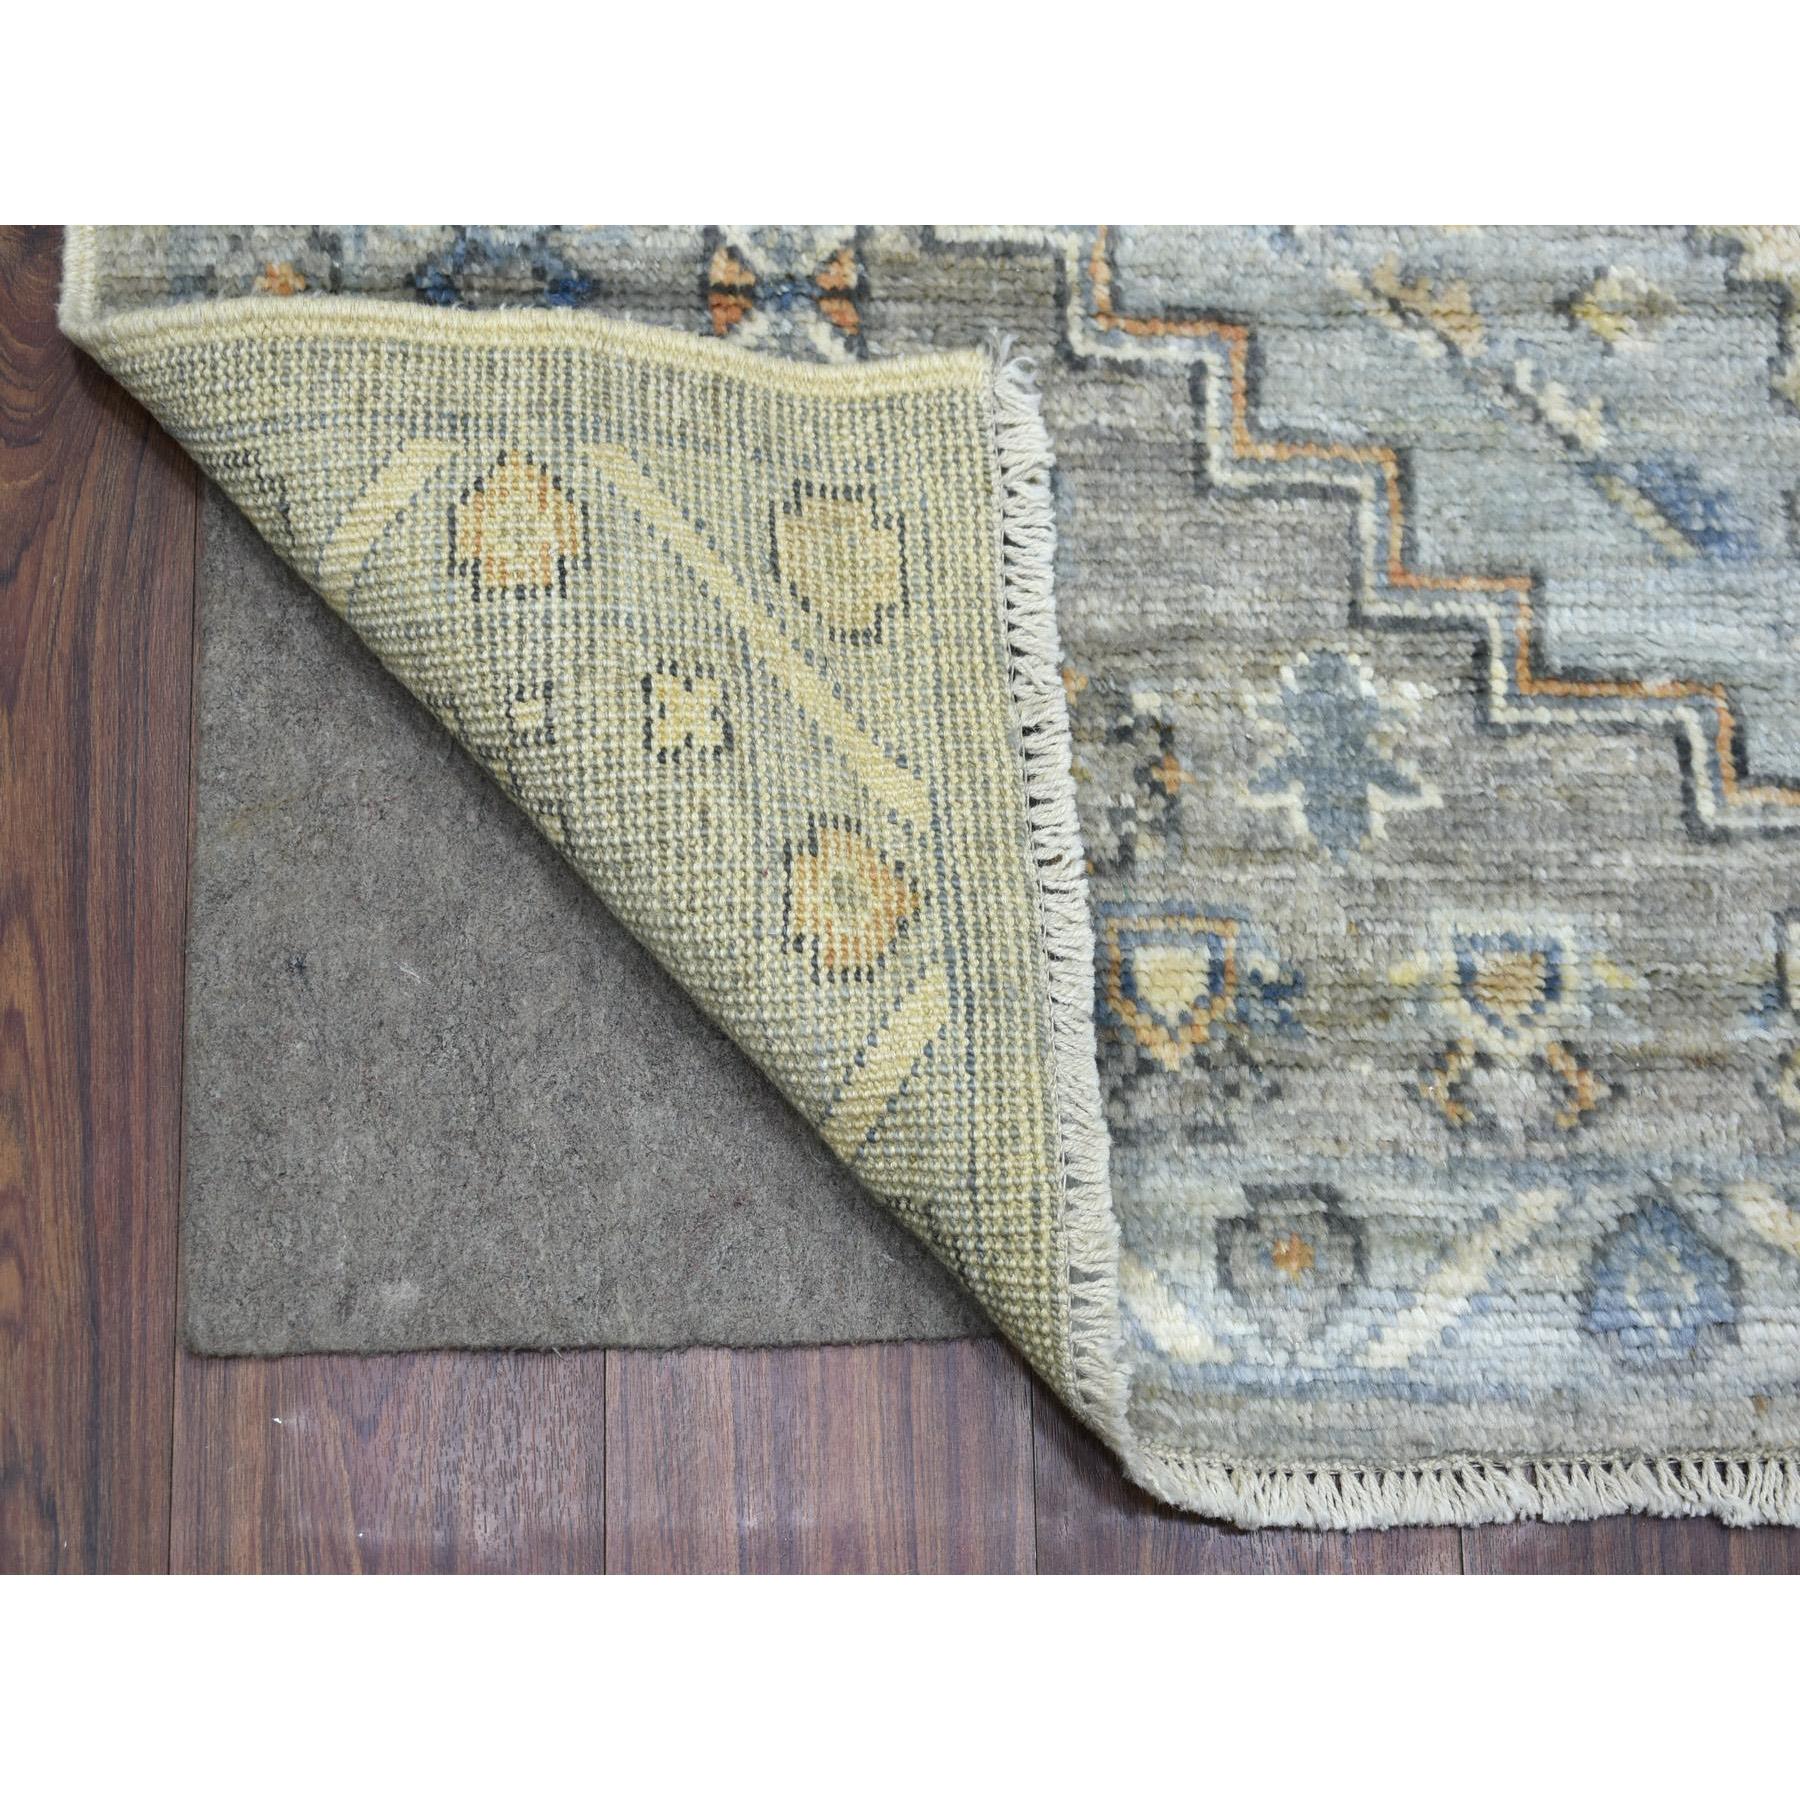 4'3"x5'7" Silver Blue, Anatolian Village Inspired with Geometric Design Natural Dyes, Soft Wool Hand Woven, Oriental Rug 